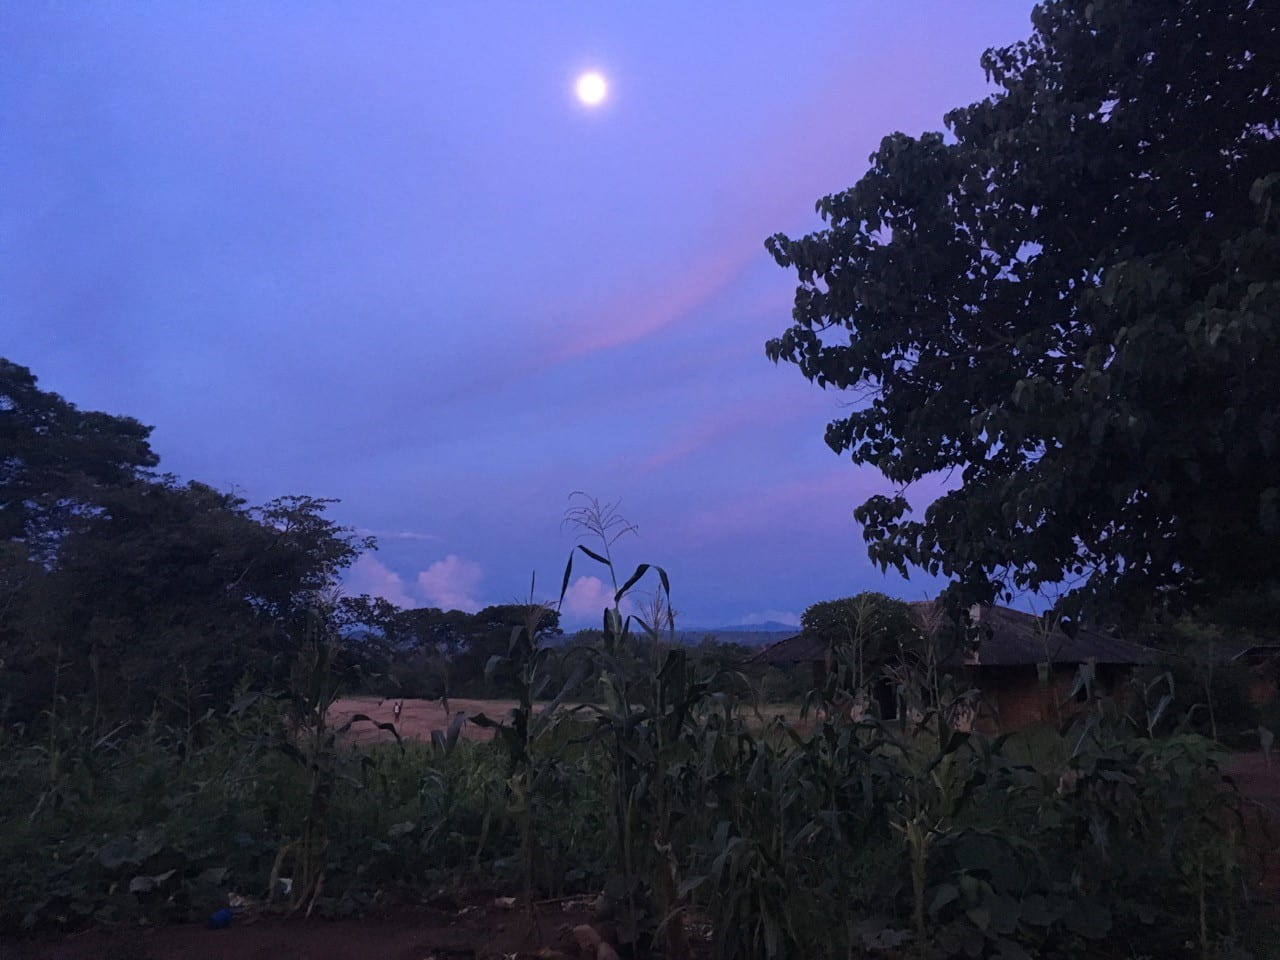 sunset and full moon over corn (maize) field